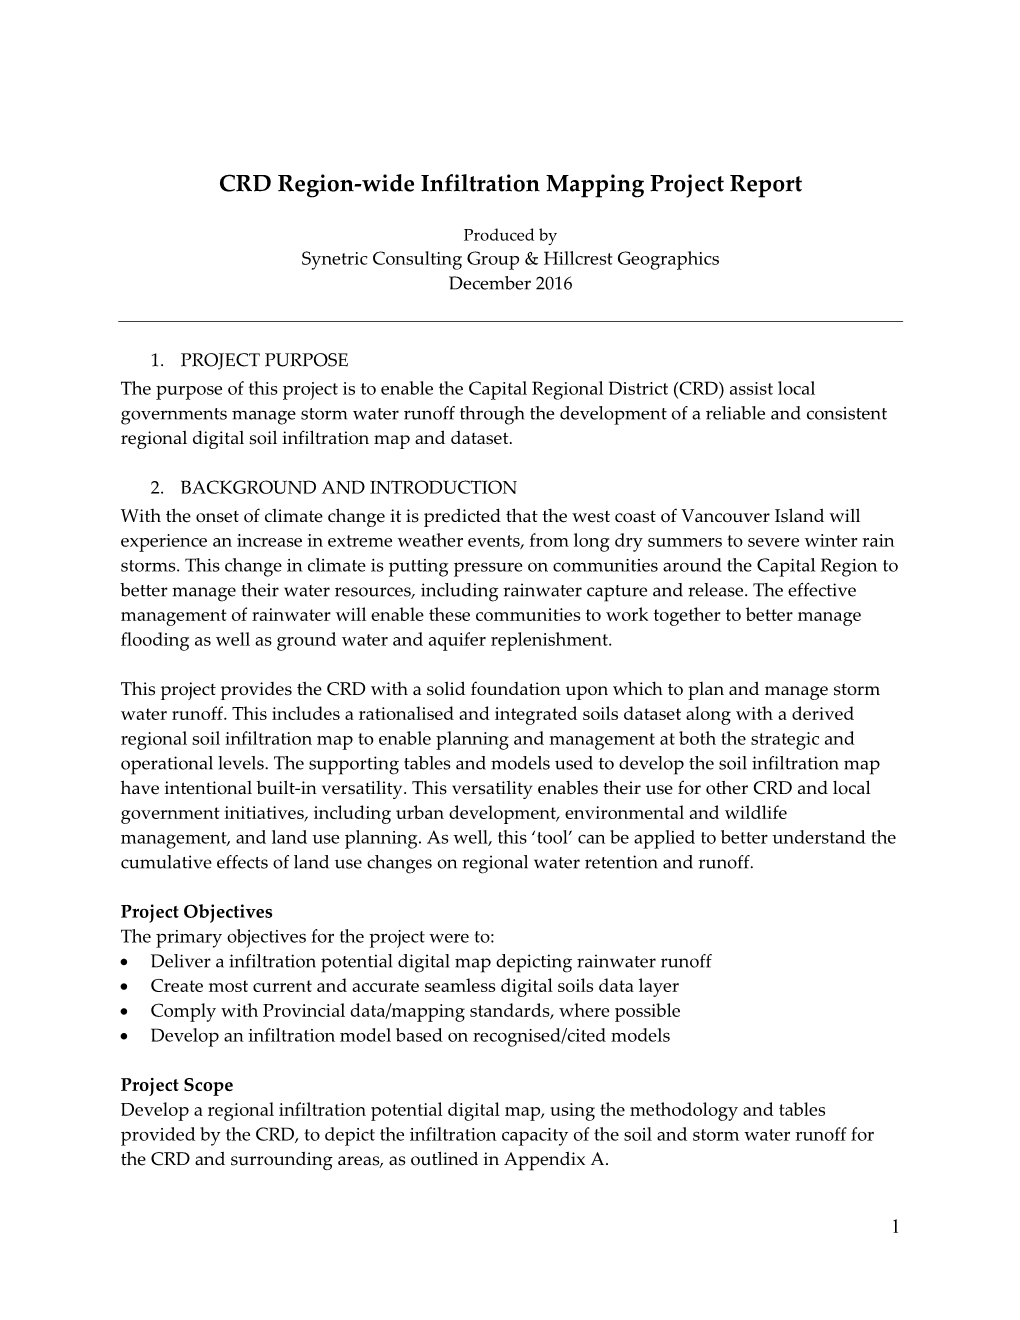 CRD Region-Wide Infiltration Mapping Project Report